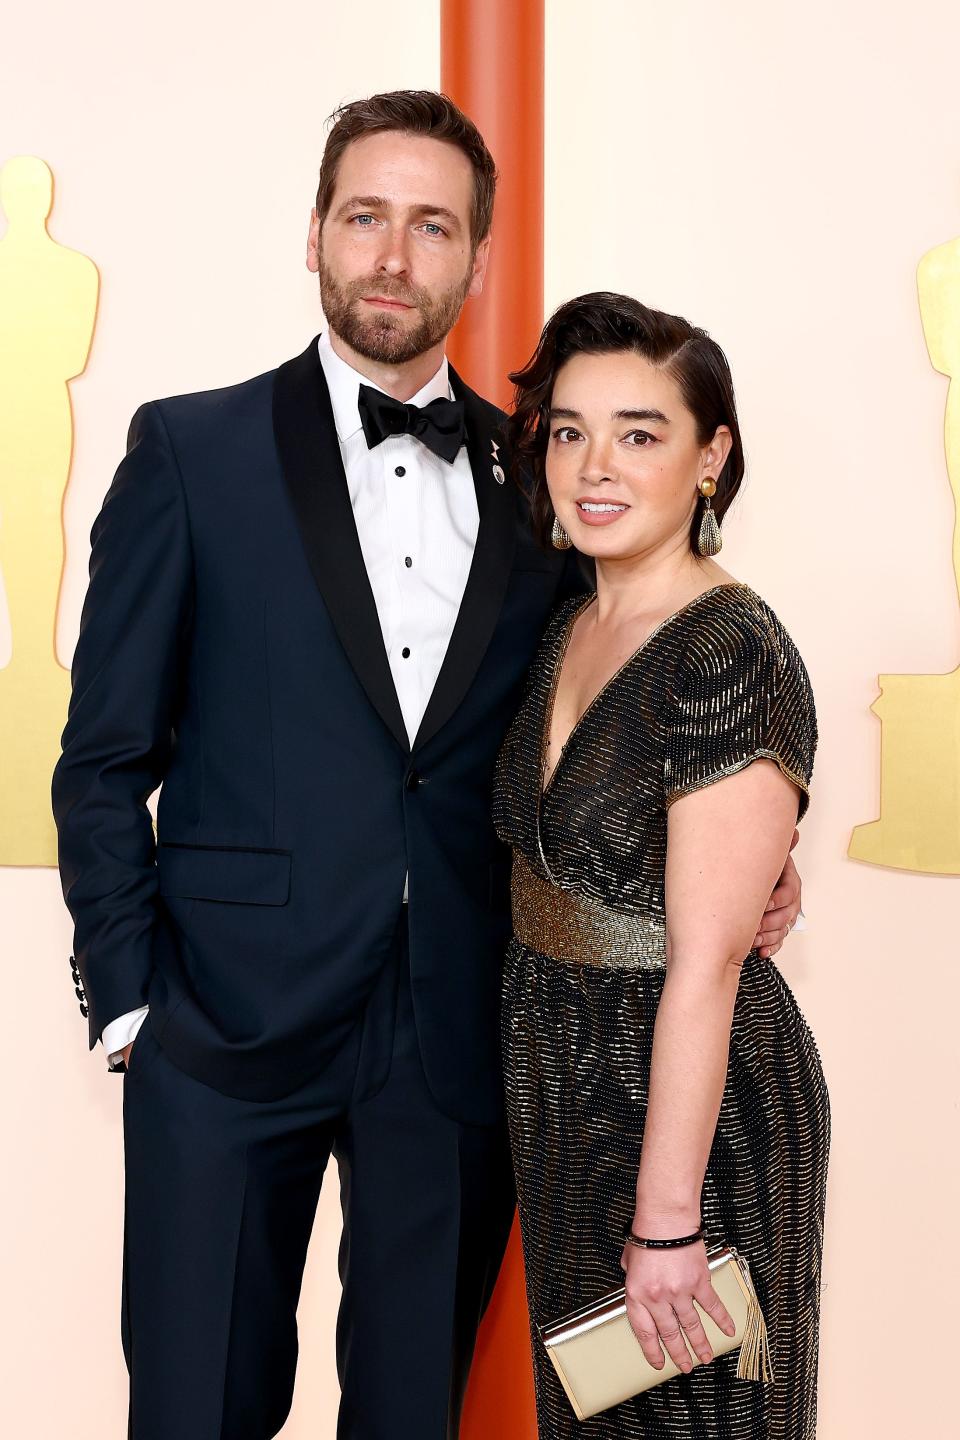 Paul Rogers and Becky Rogers at the 95th Academy Awards on March 12, 2023, in Hollywood, California.